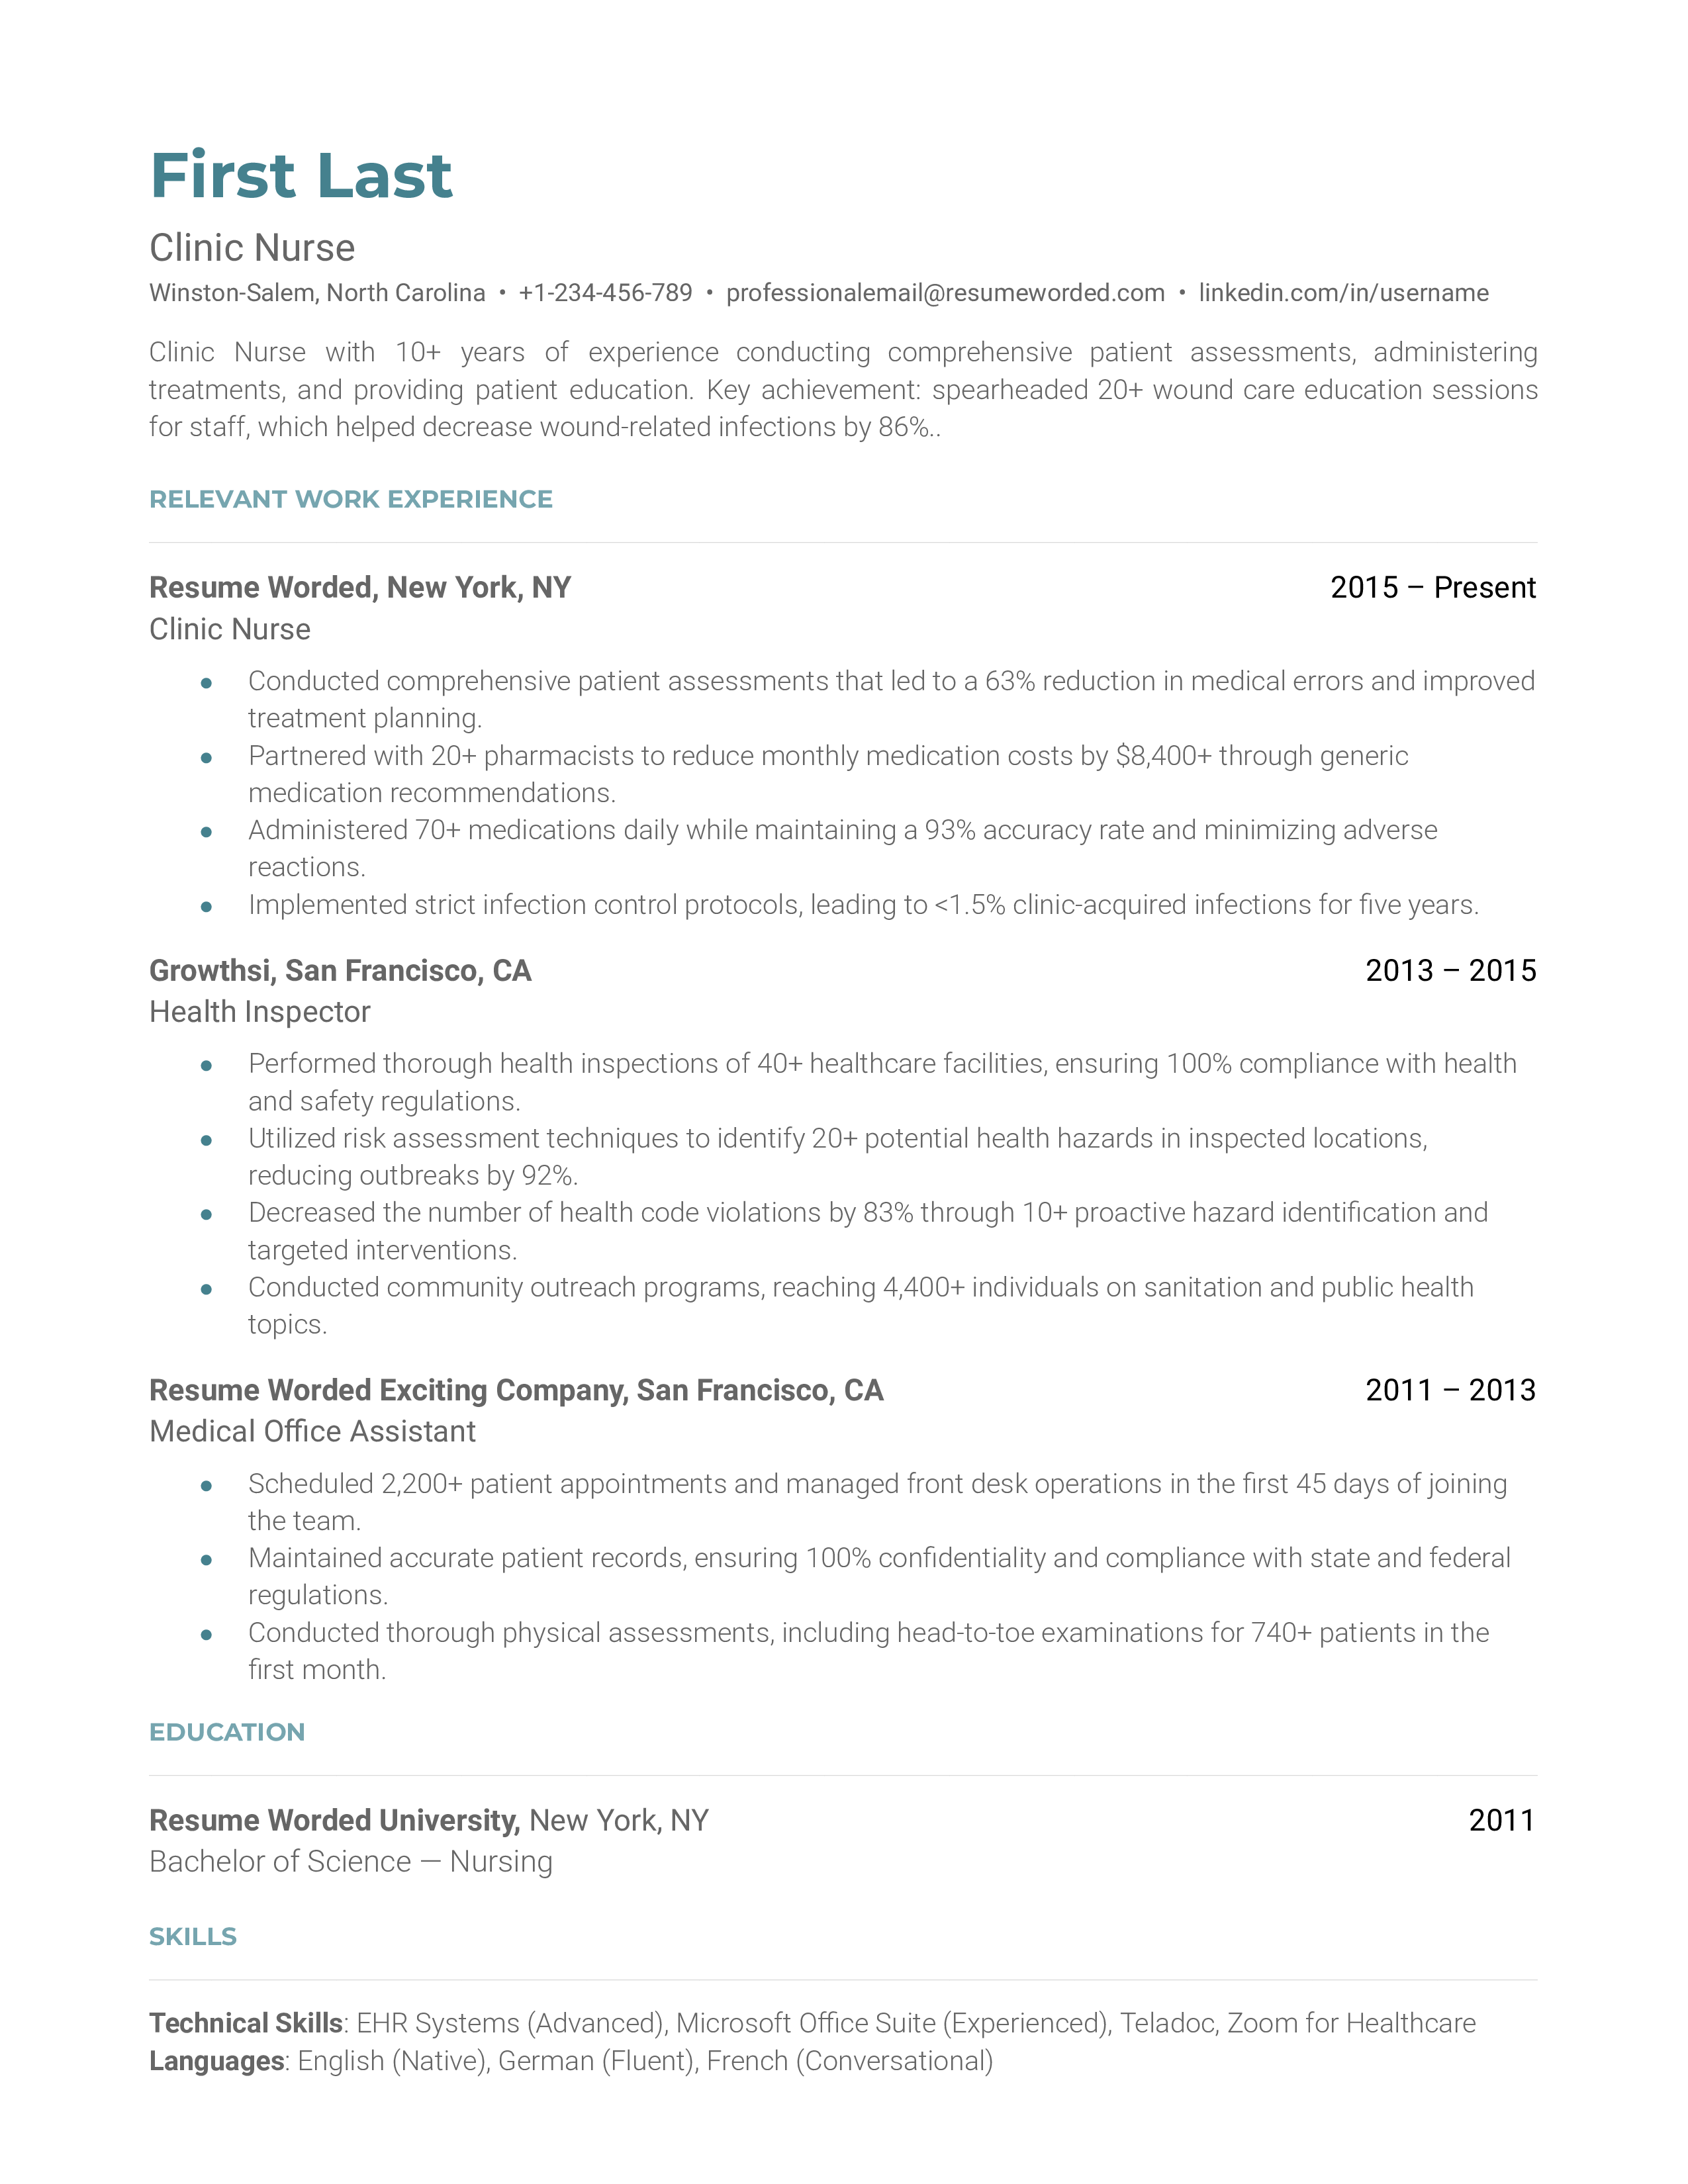 A detailed resume of a clinic nurse showcasing technical skills and patient education expertise.